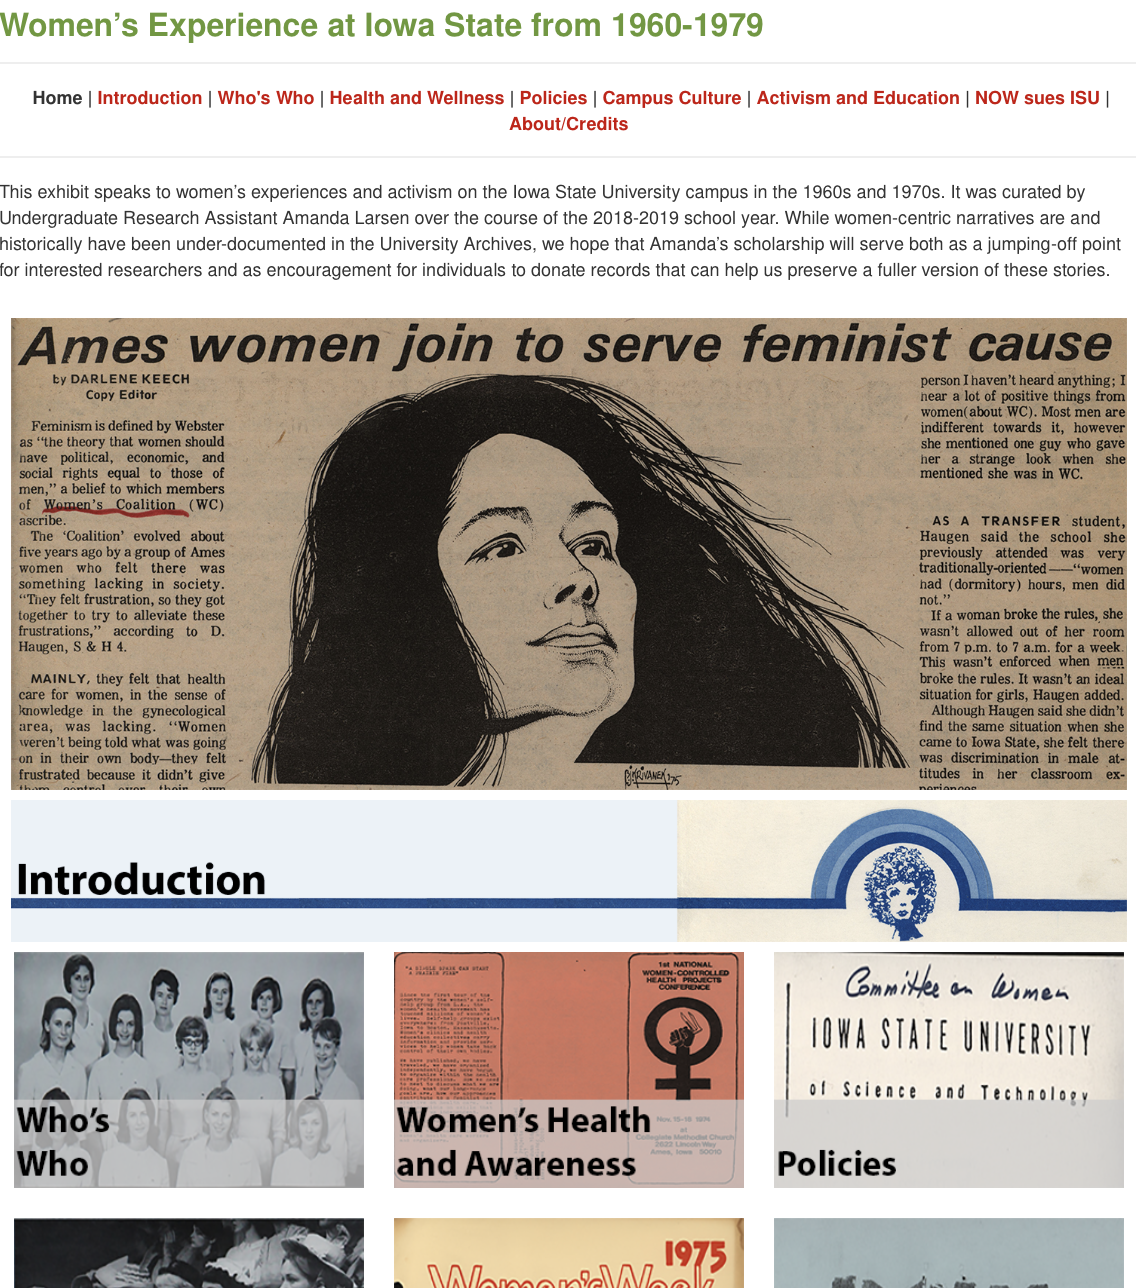 Women's experience at Iowa State from 1960-1979